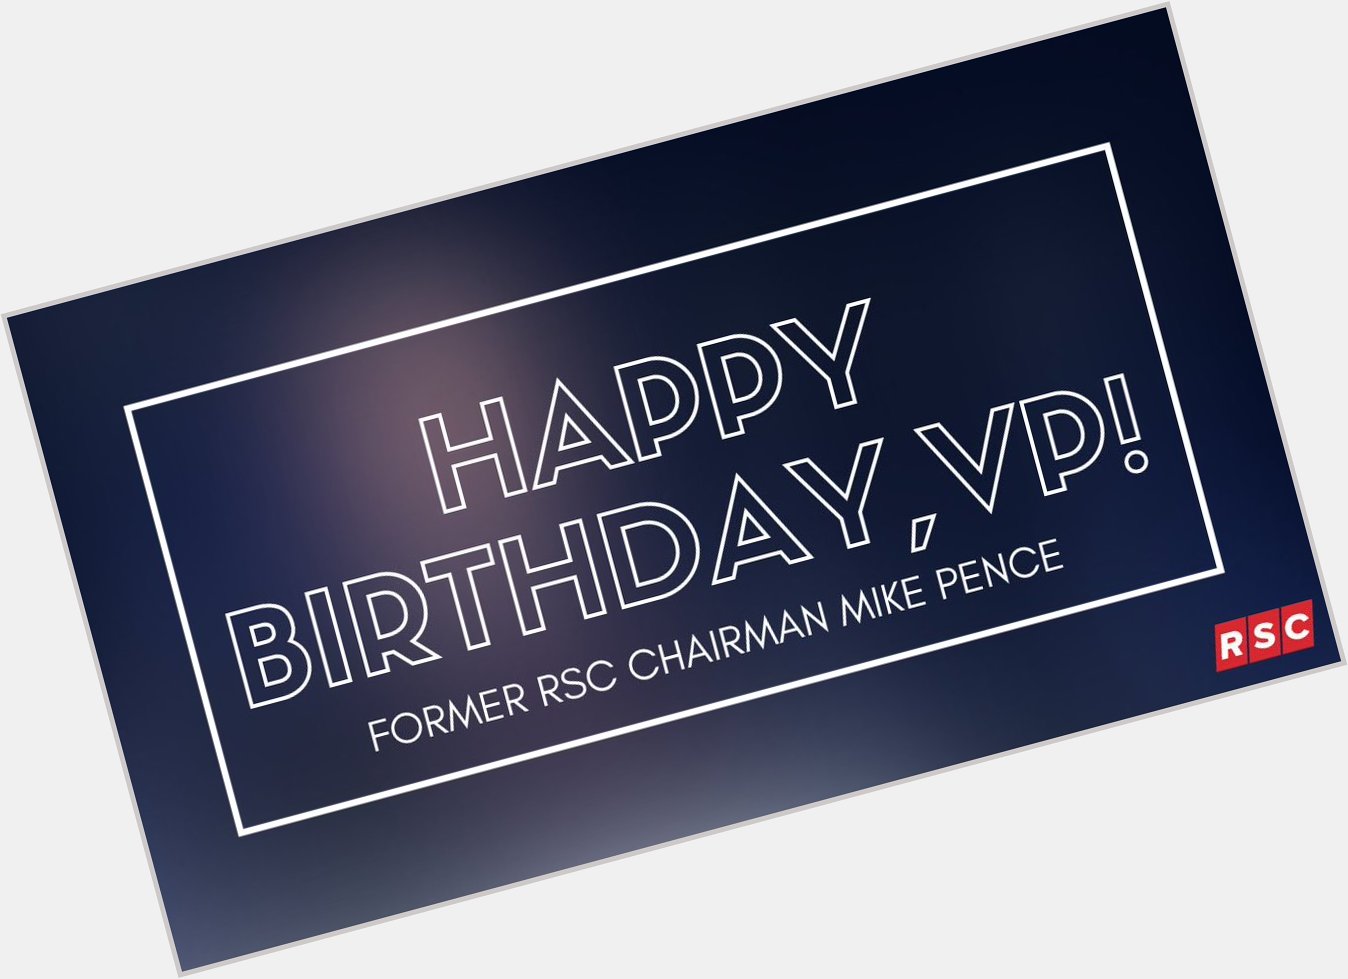 Happy birthday to former RSC Chairman and now Mike Pence! 